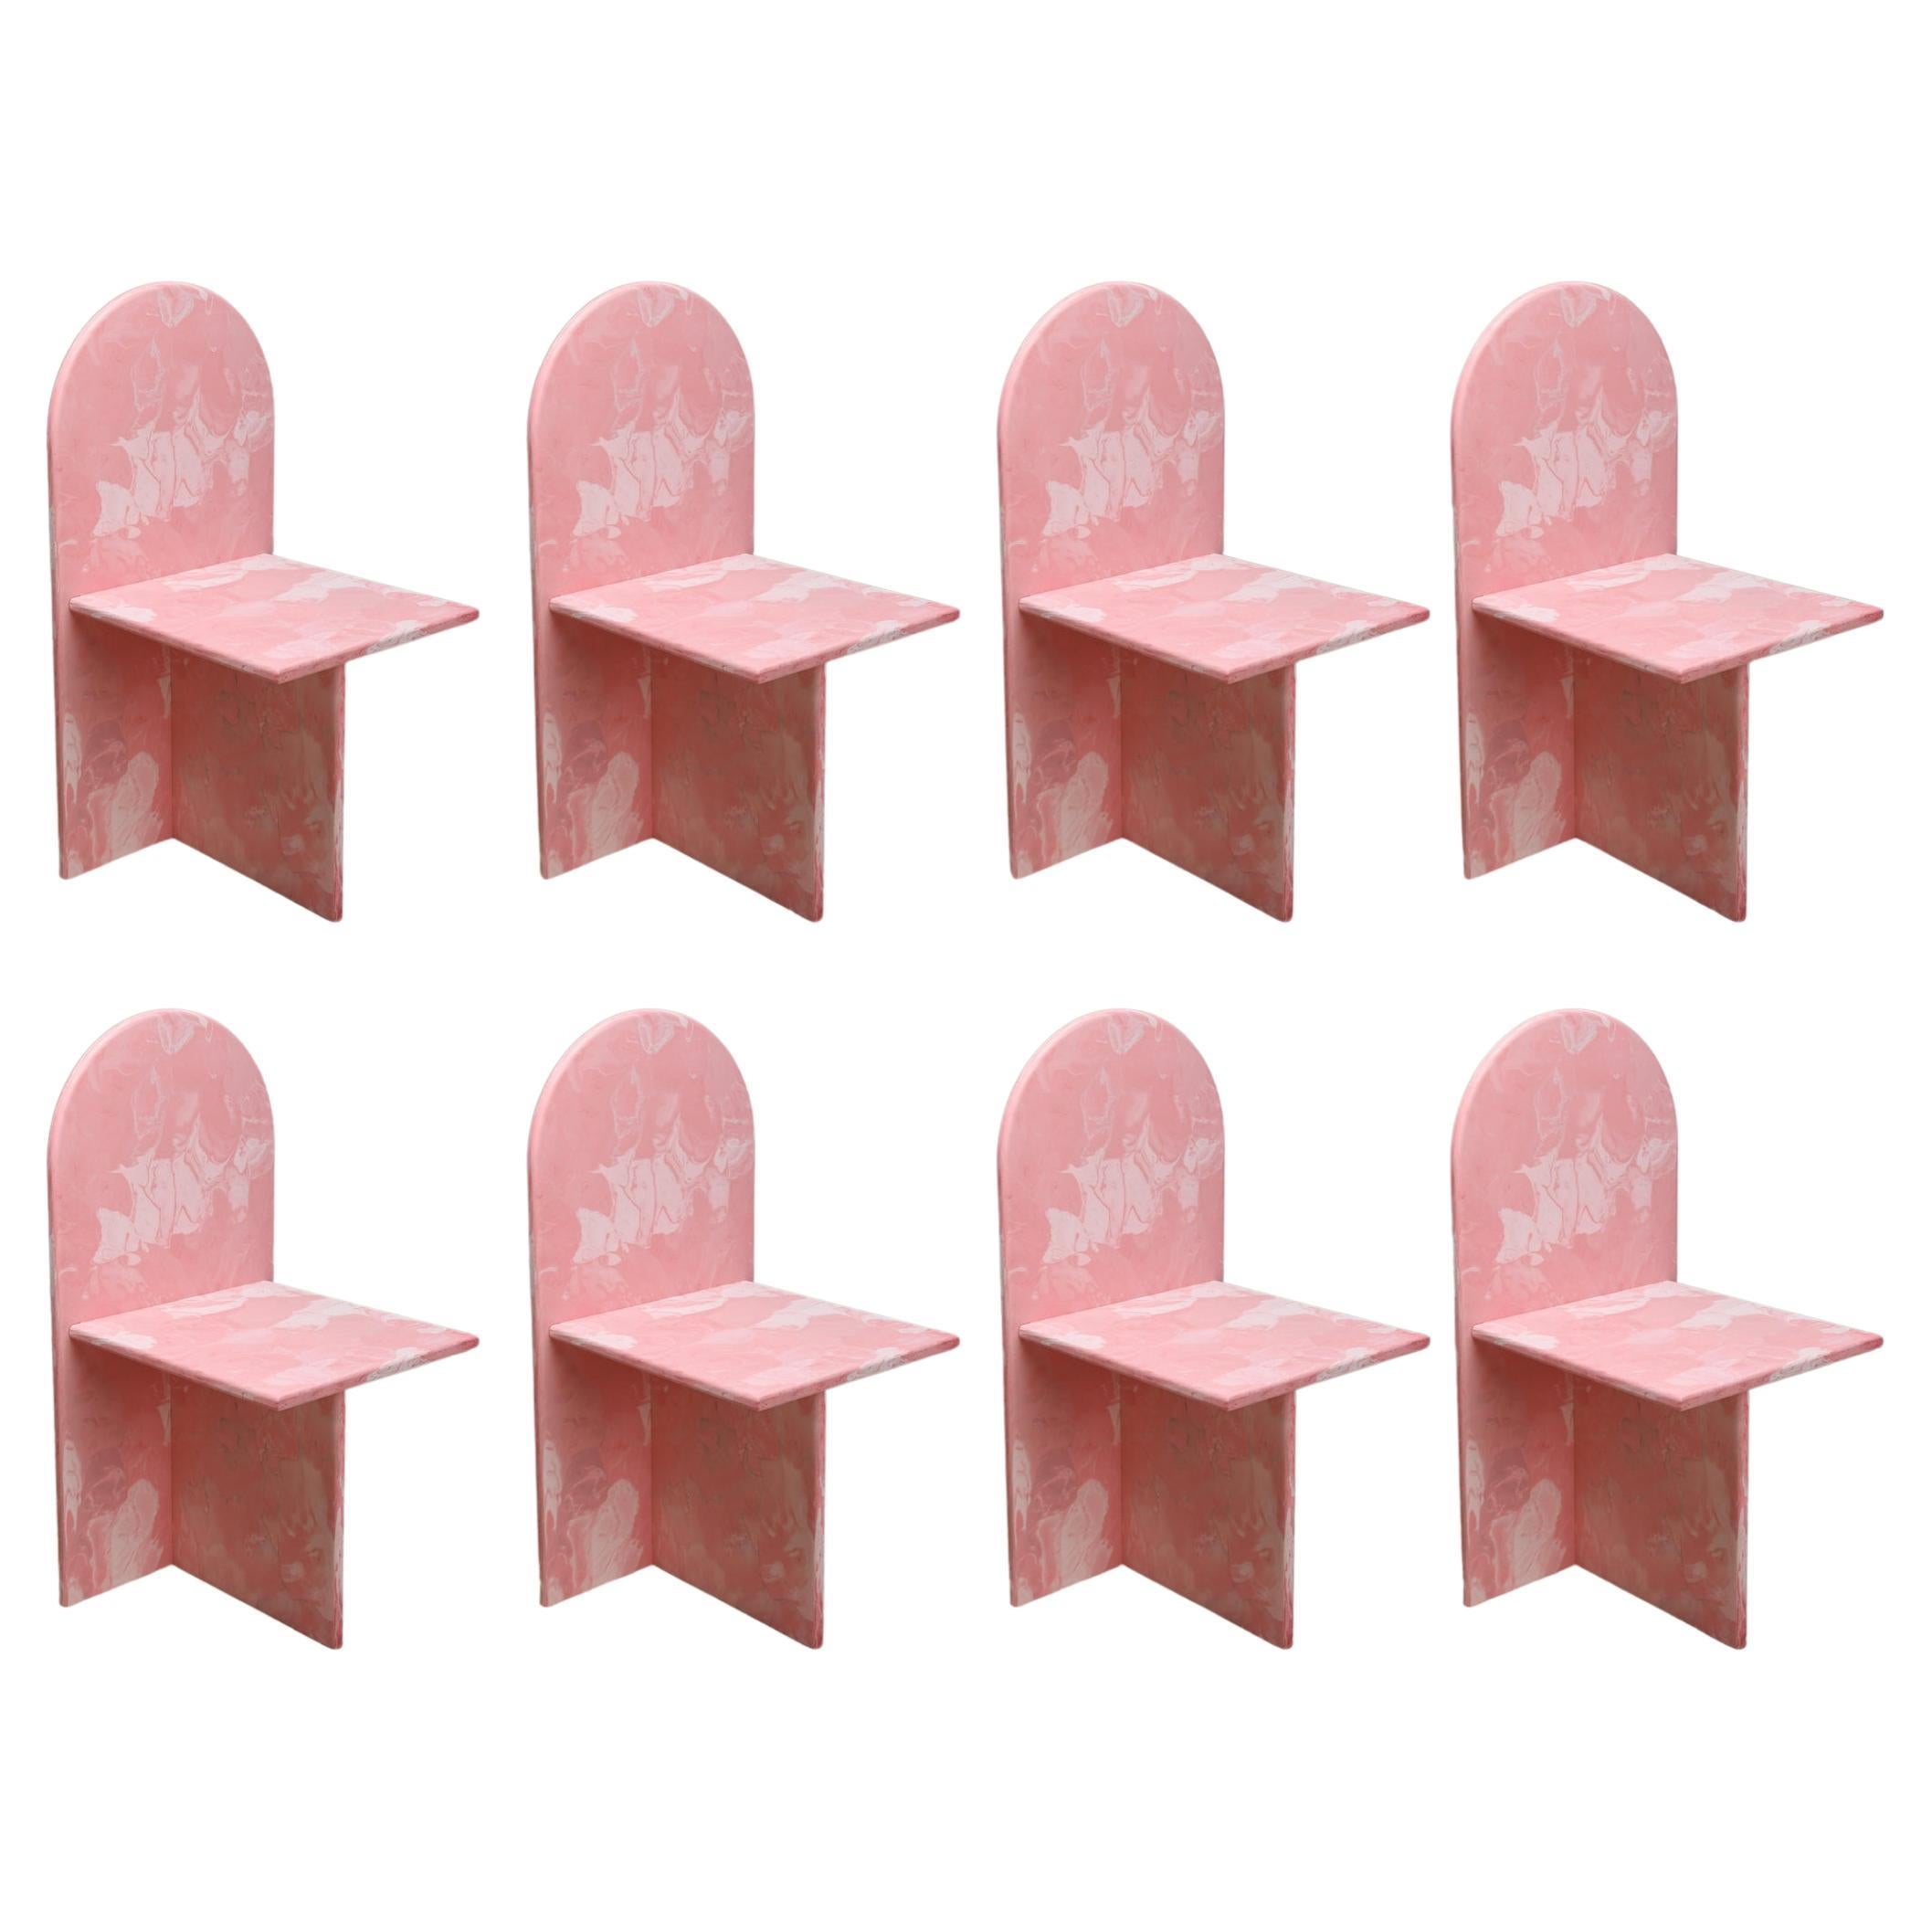 8x Contemporary Chairs Pink 100% Recycled Plastic Hand-Crafted by Anqa Studios For Sale